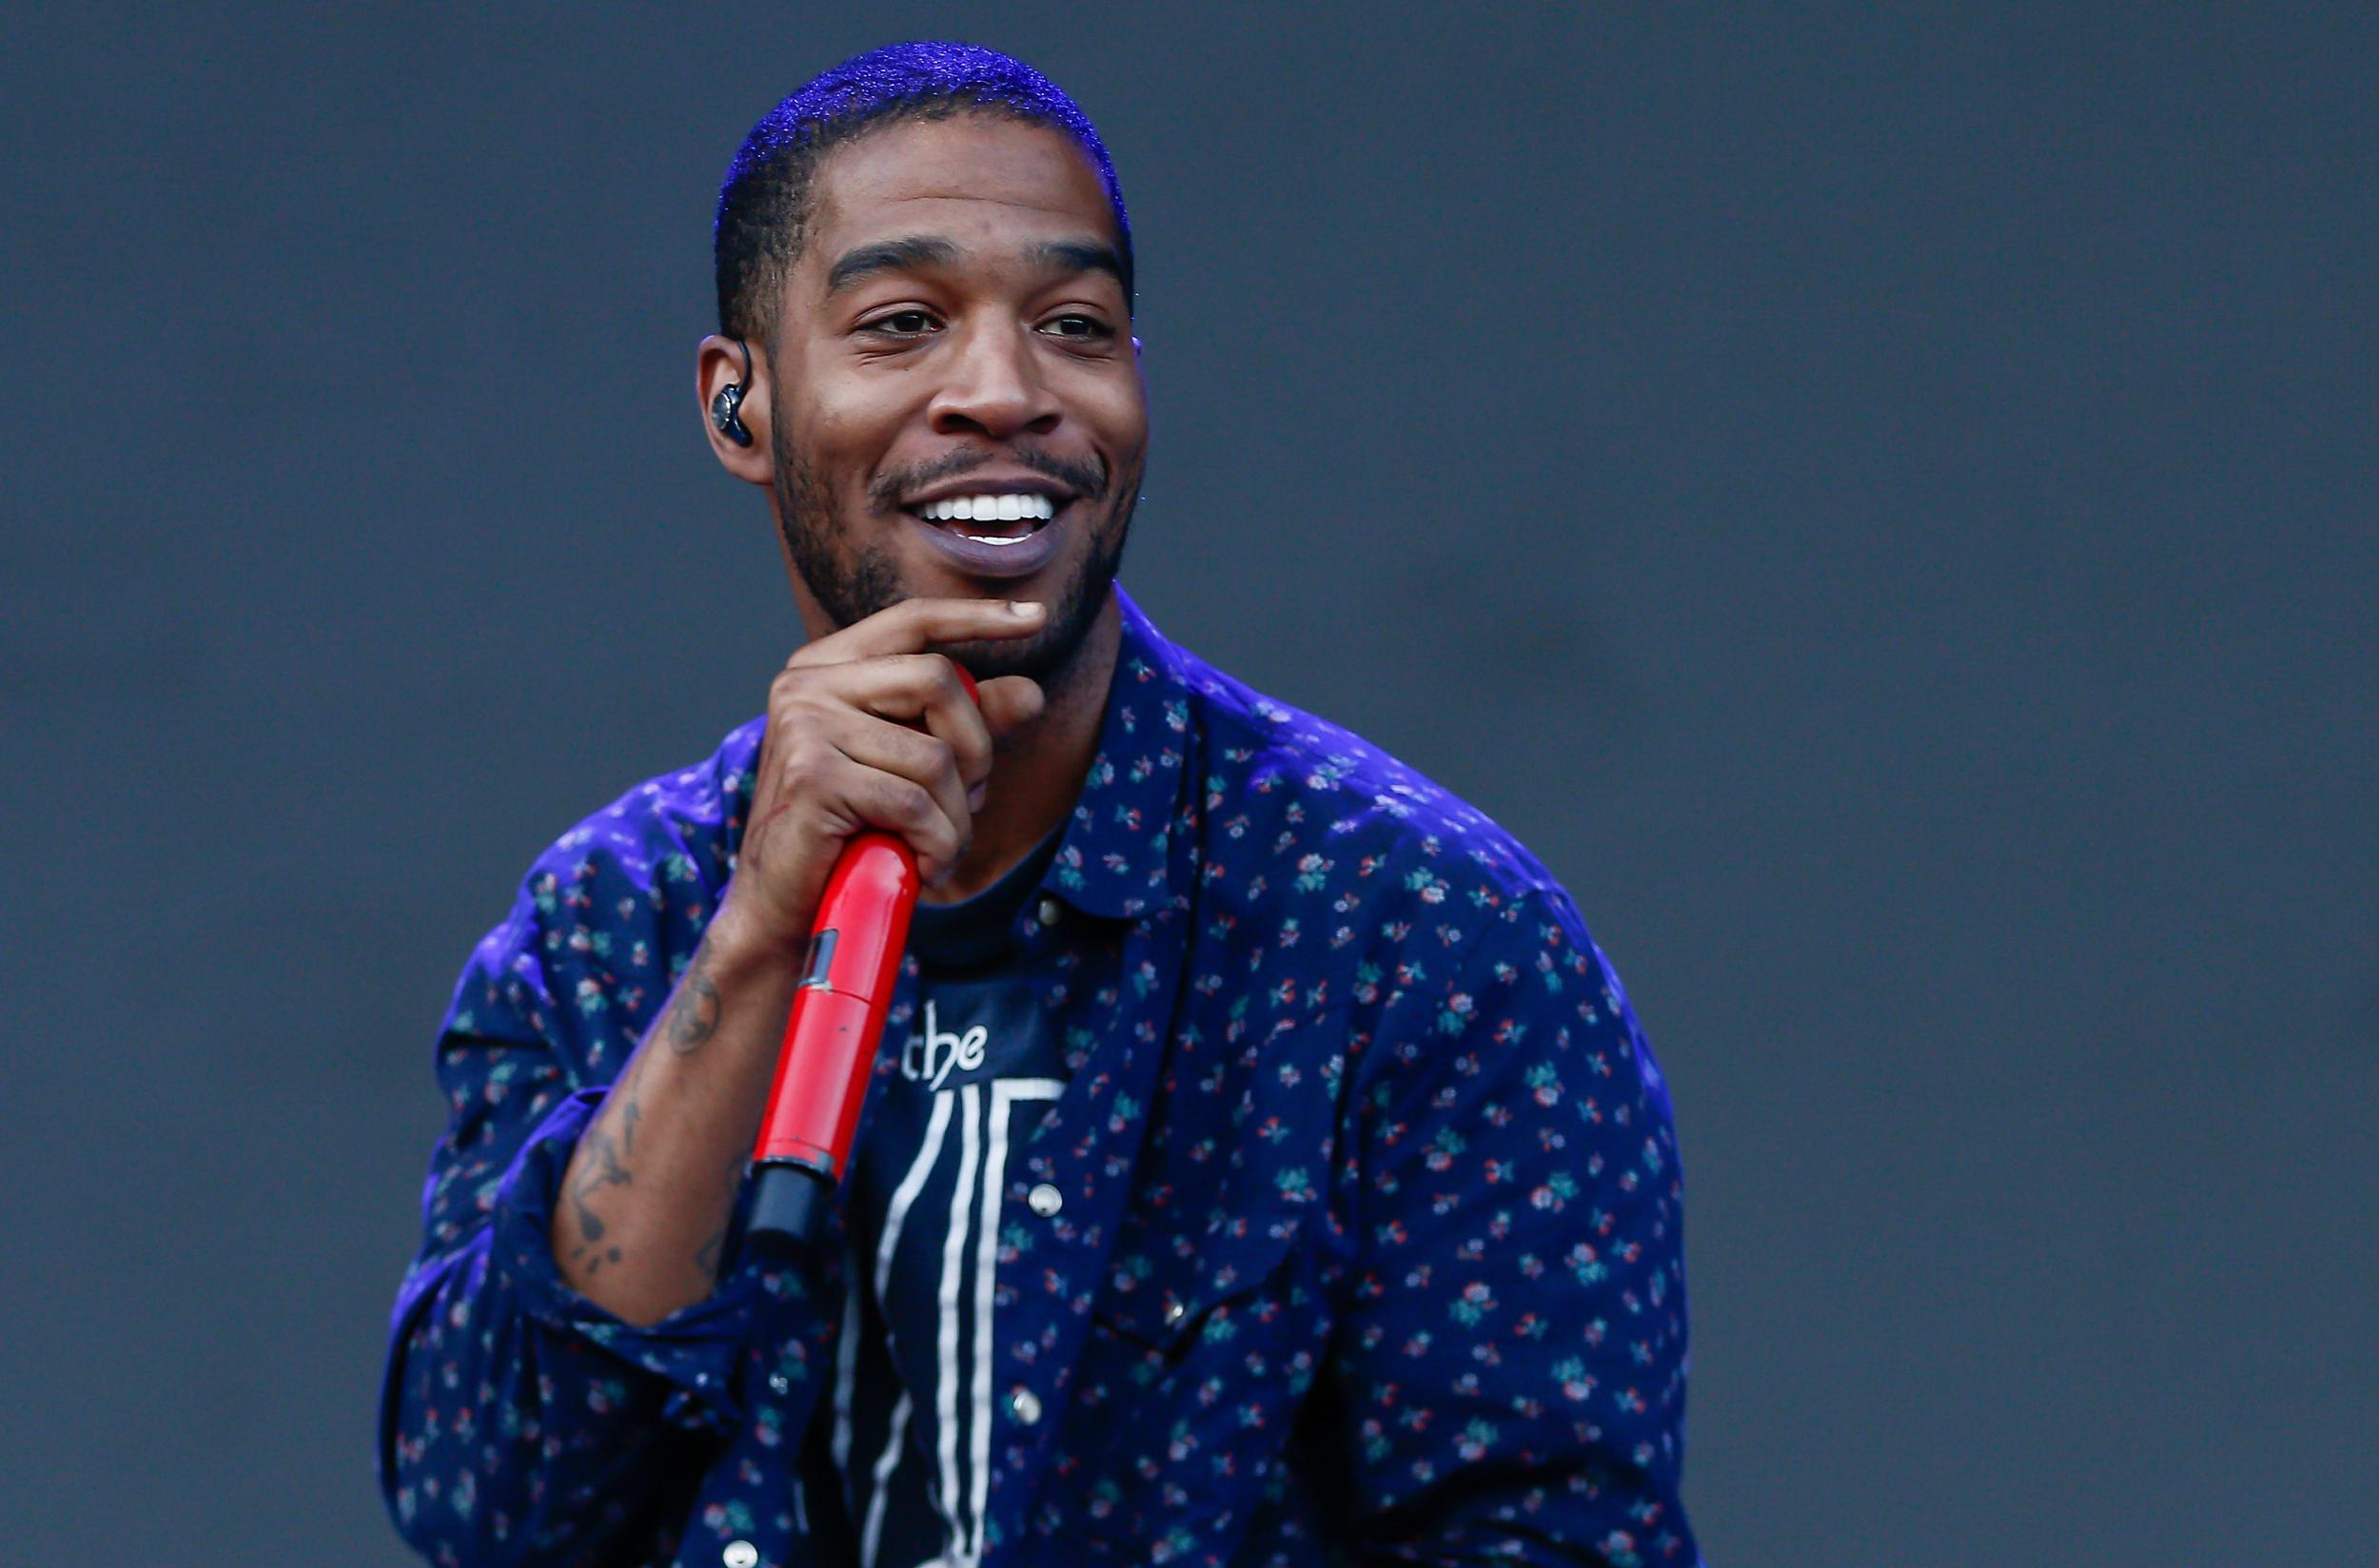 Kid Cudi checks himself into rehab over depression and suicidal urges ...